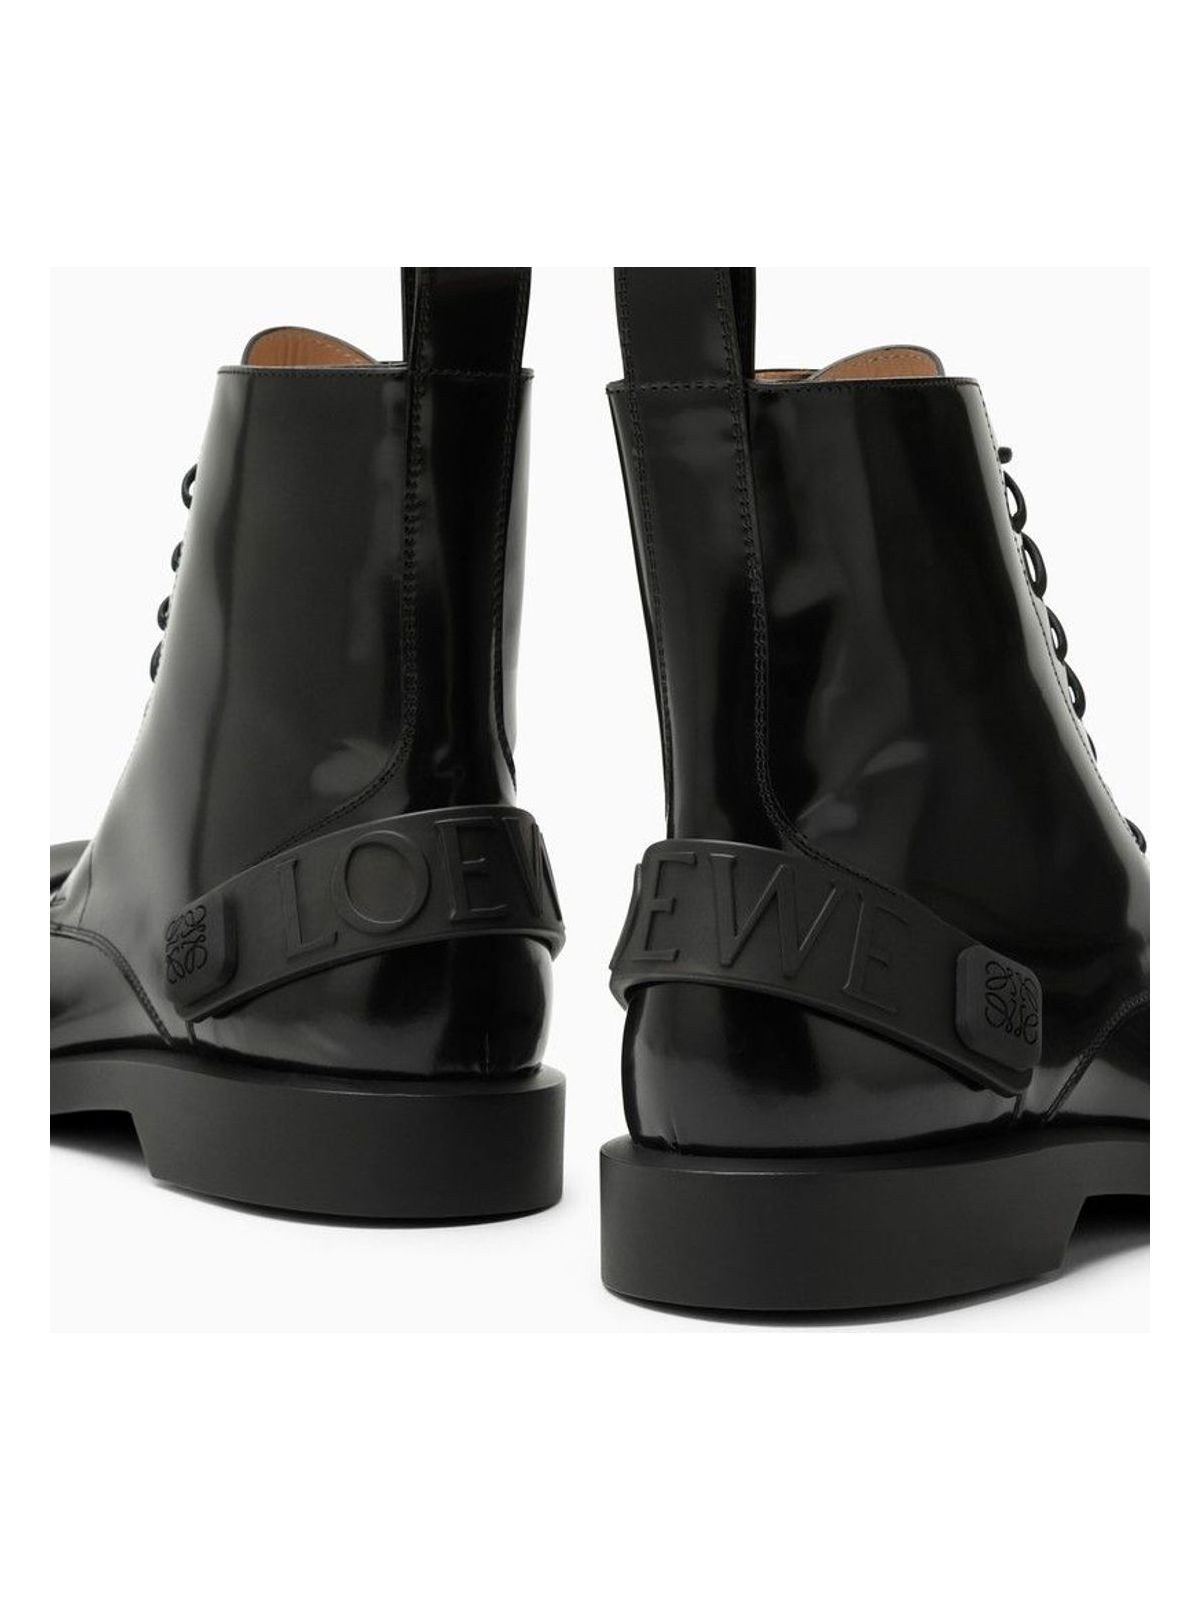 1100 LOEWE  CAMPO BLACK LACE-UP BOOTS